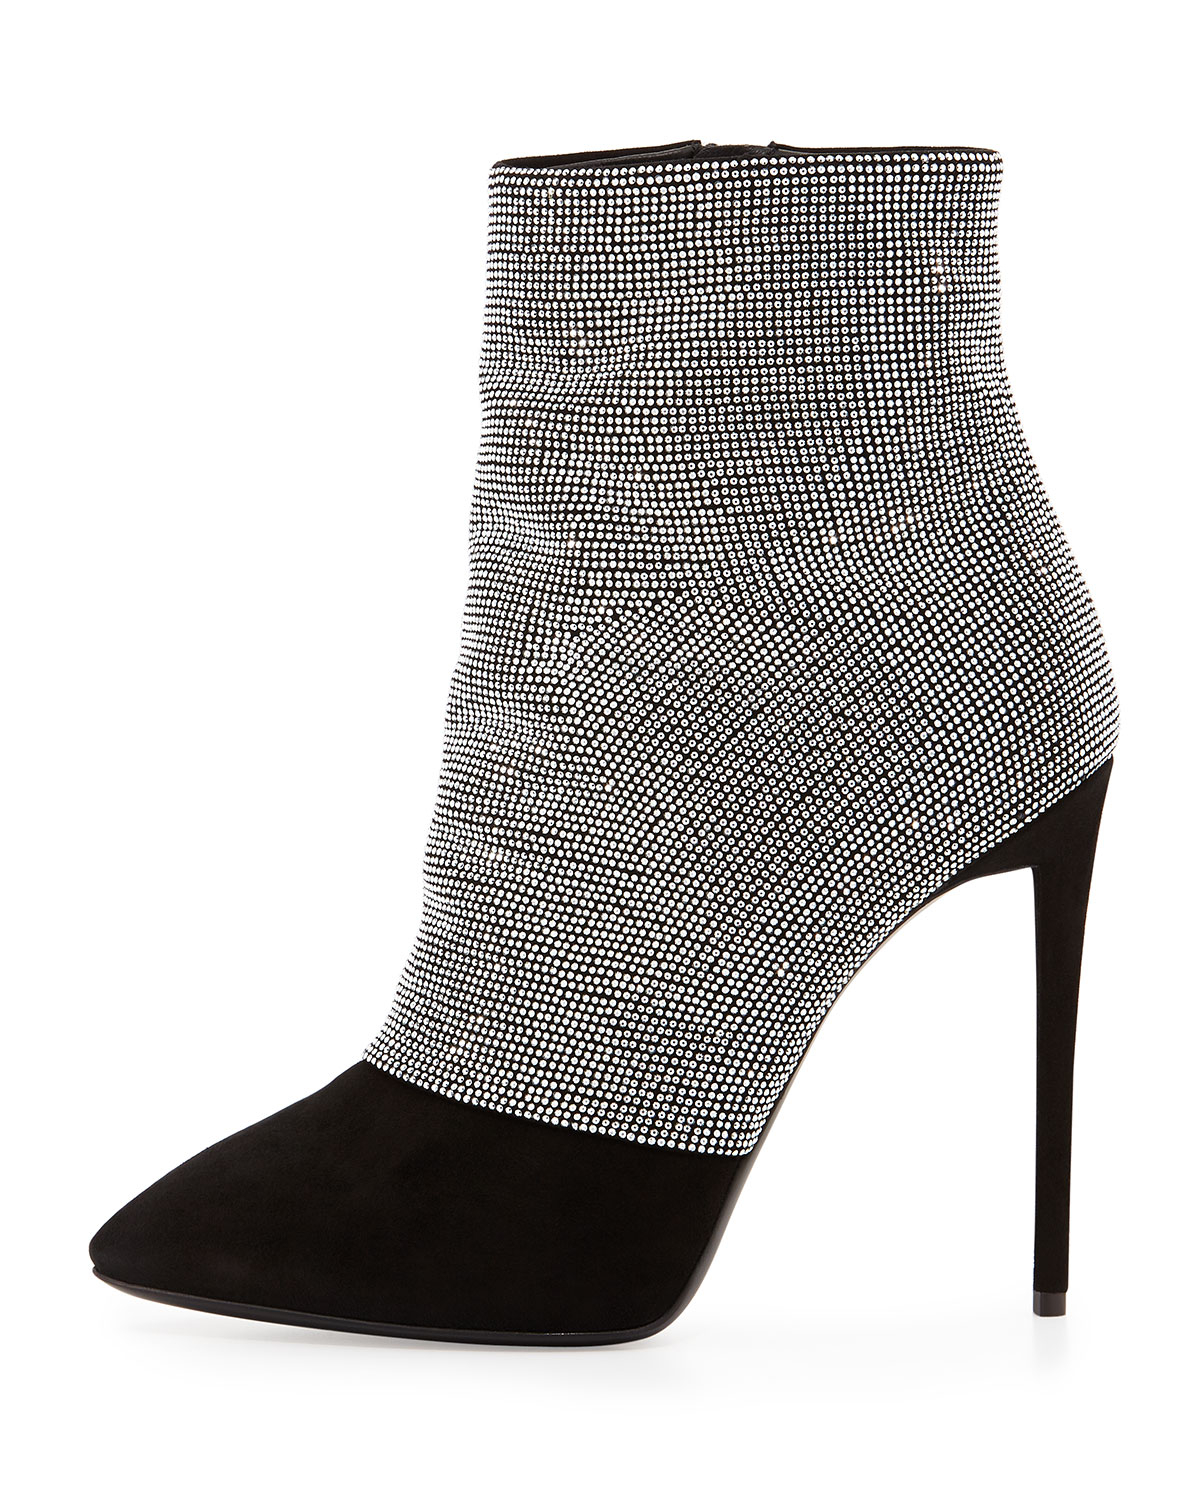 Lyst - Giuseppe zanotti Strass And Suede Ankle Boot in Black